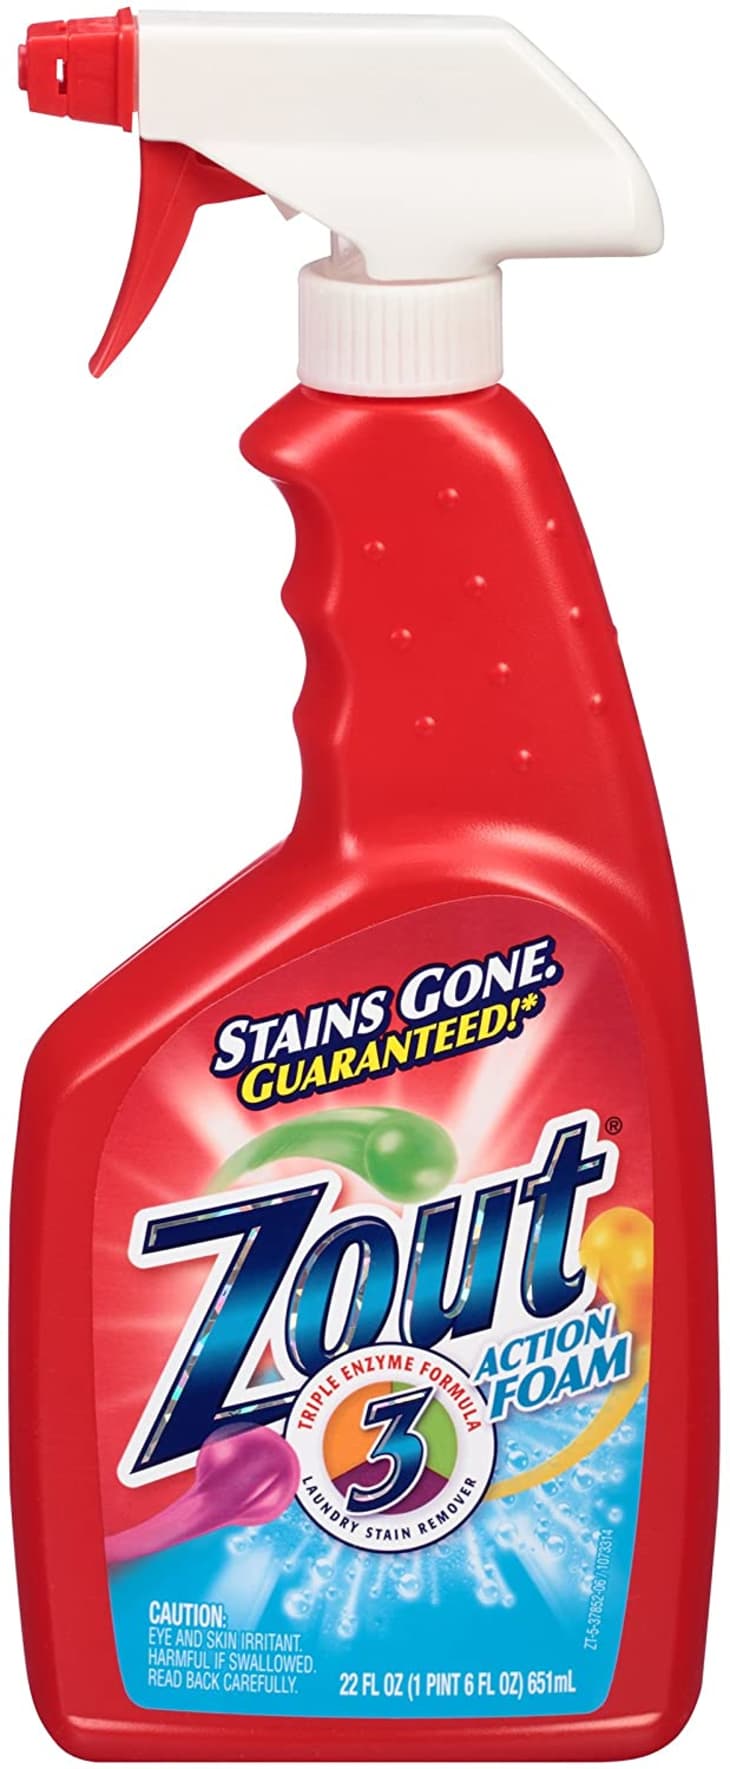 Zout Triple Enzyme Formula Laundry Stain Remover Foam at Amazon